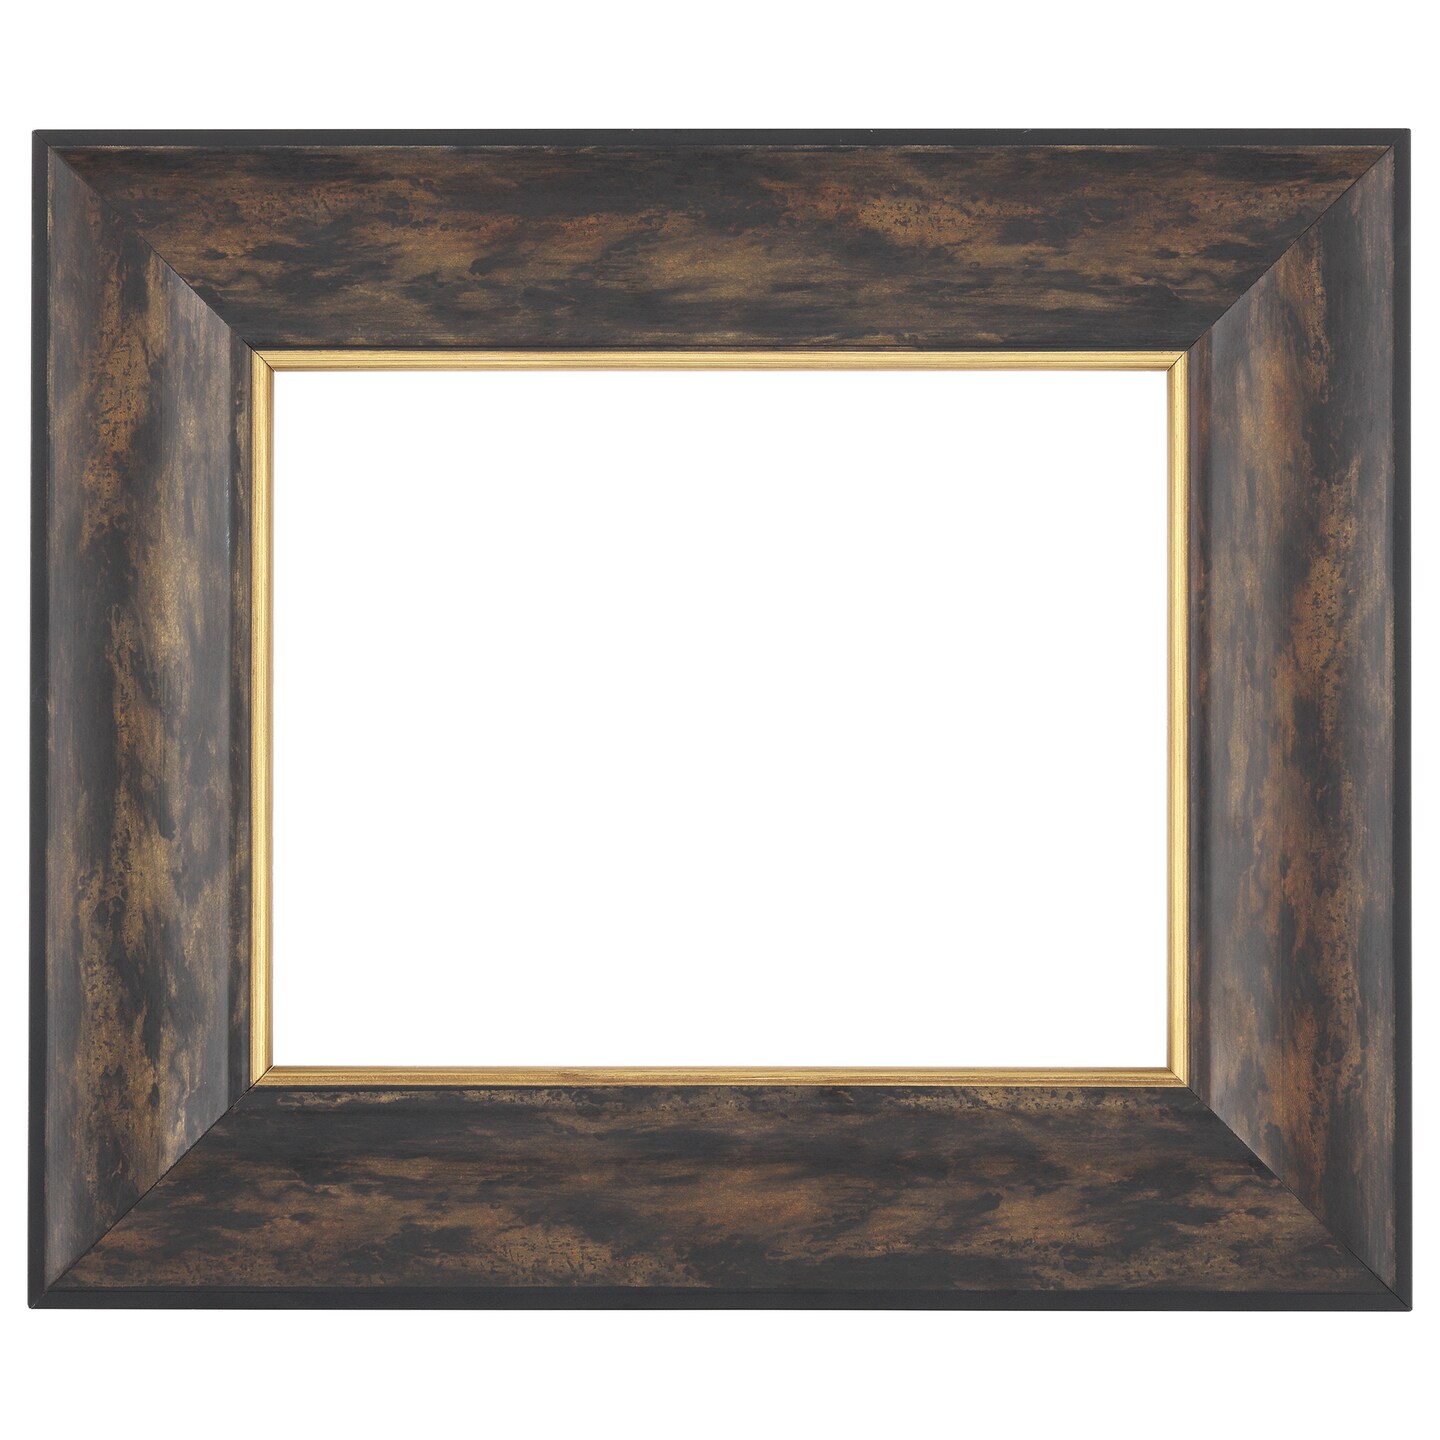 Imperial Frames Saint James Museum Collection - 10 Pack of Beautifully Hand-Finished Dark Burl/Gold Fillet Open Back Frames for Artists, Display, Canvas, &#x26; More!